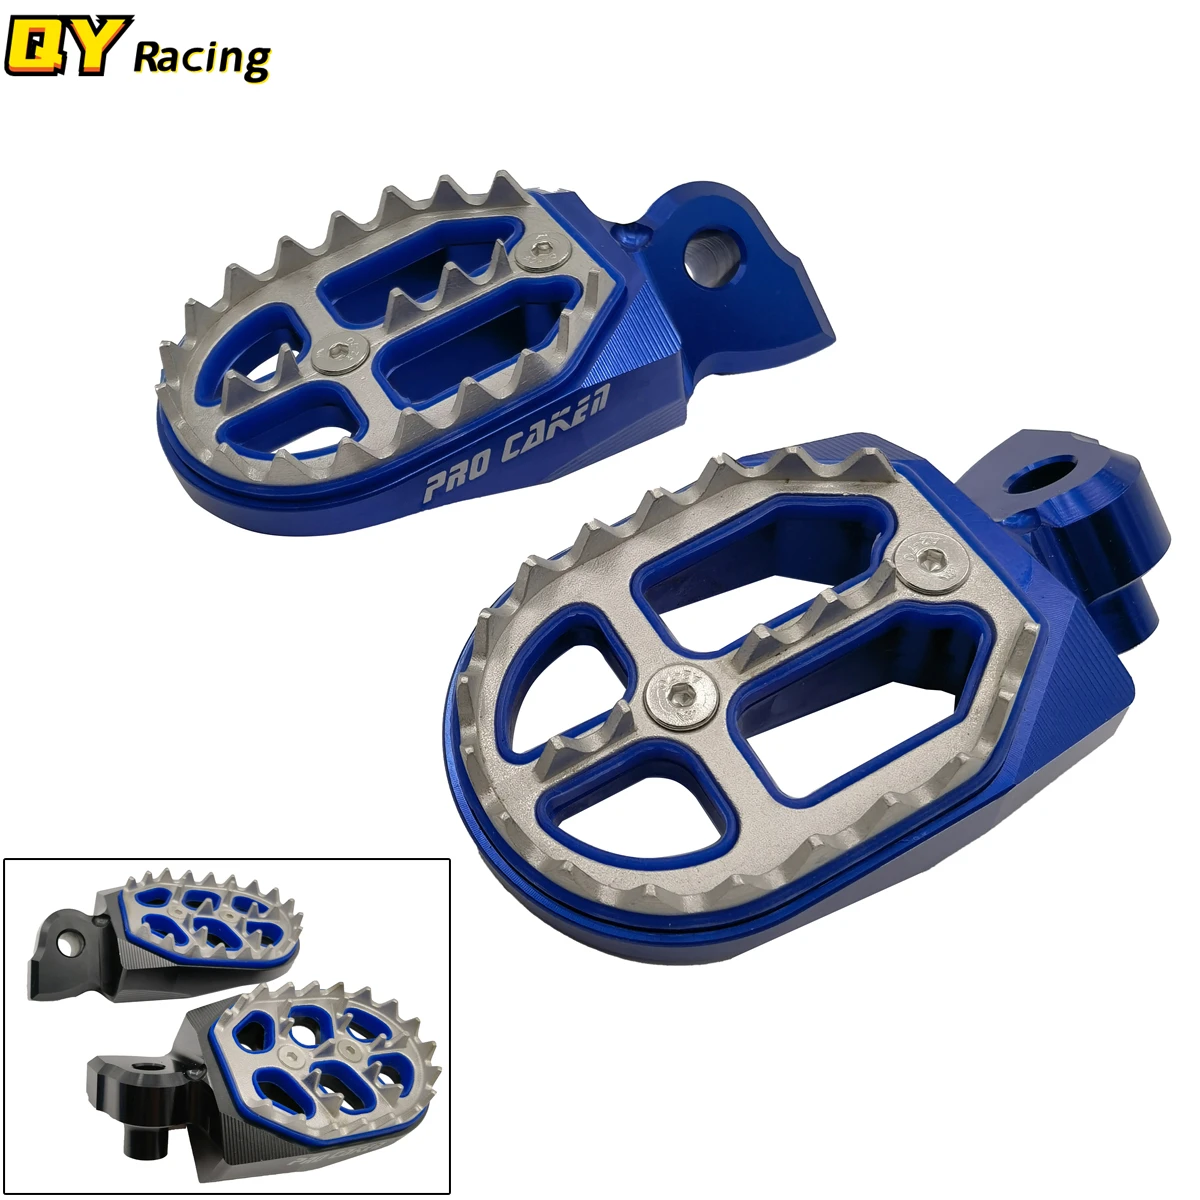 

Foot Pegs Rest Pedal Footrests For Yamaha YZ125 YZ250 YZ250F YZ450F WR250F WR450F YZ125X YZ250X YZ250FX YZ450FX YZ85 YZ 125 250